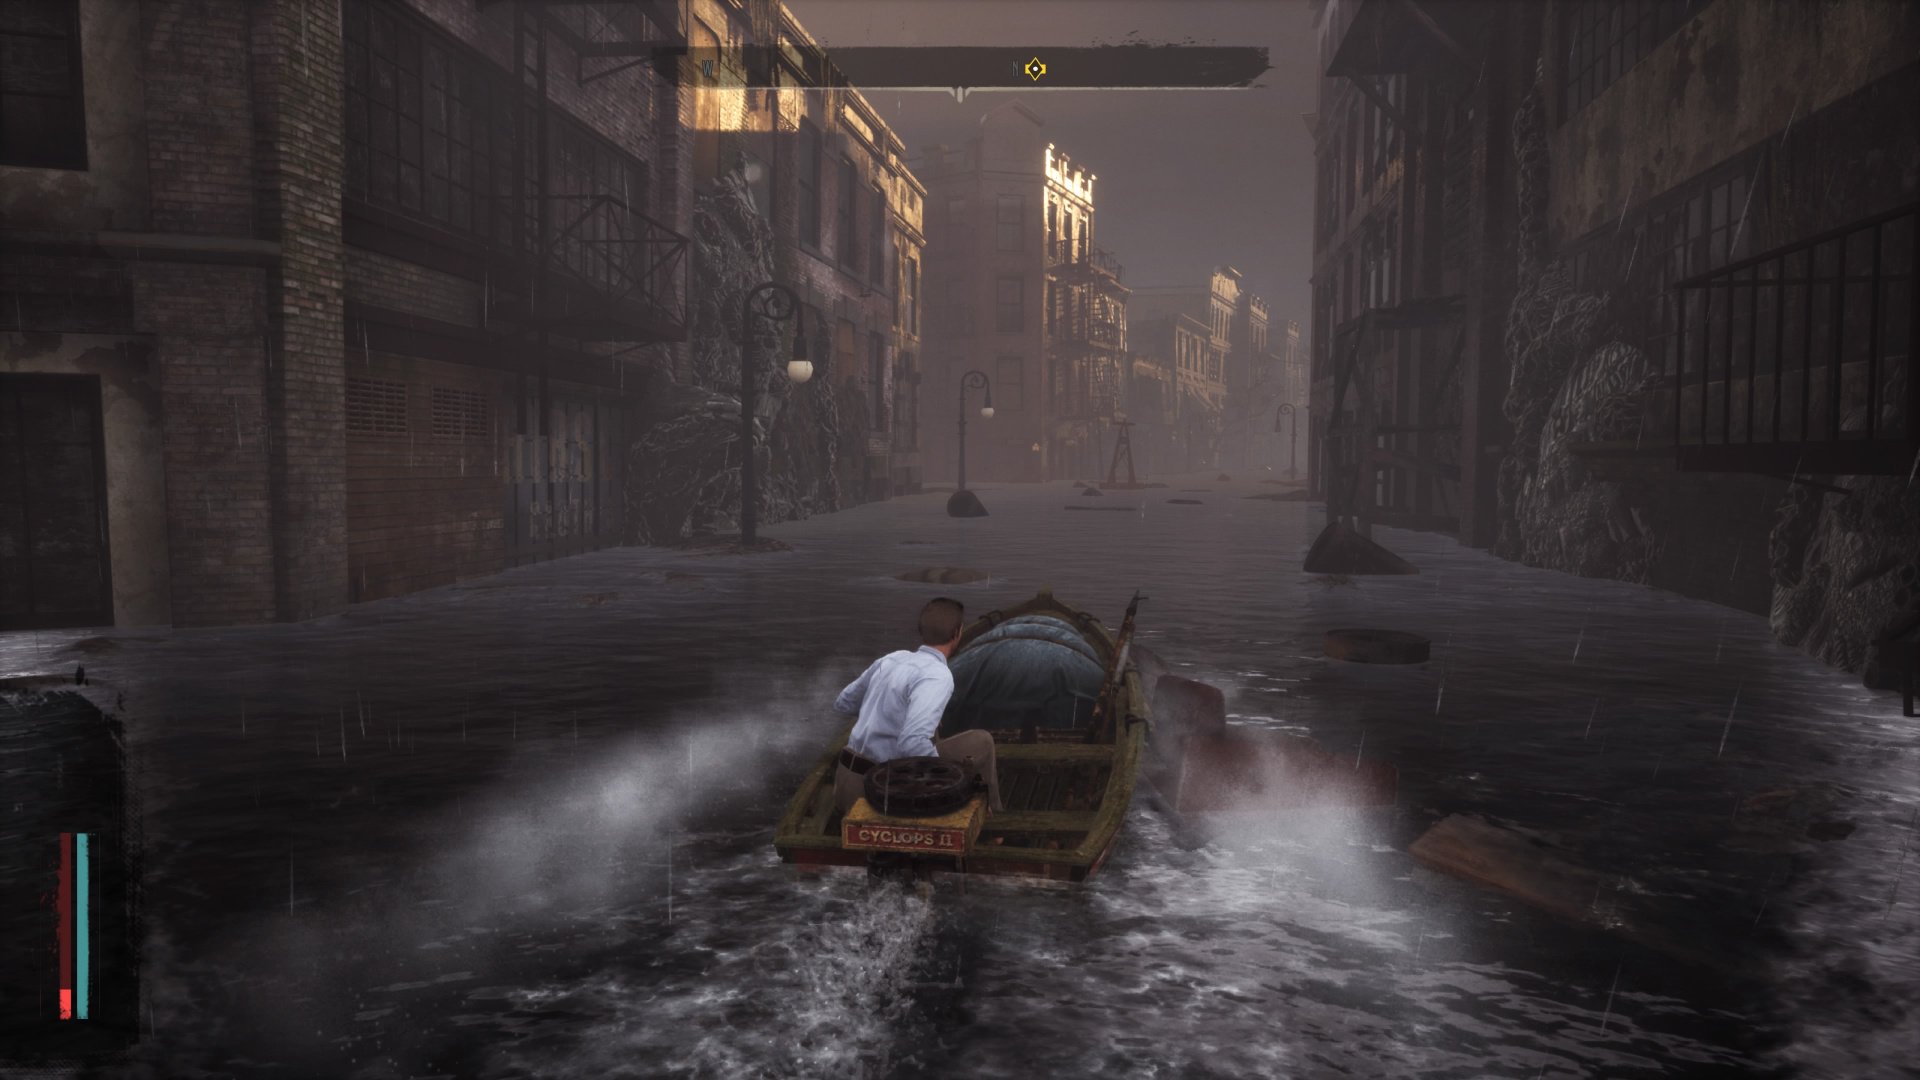 the sinking city ps5 download free